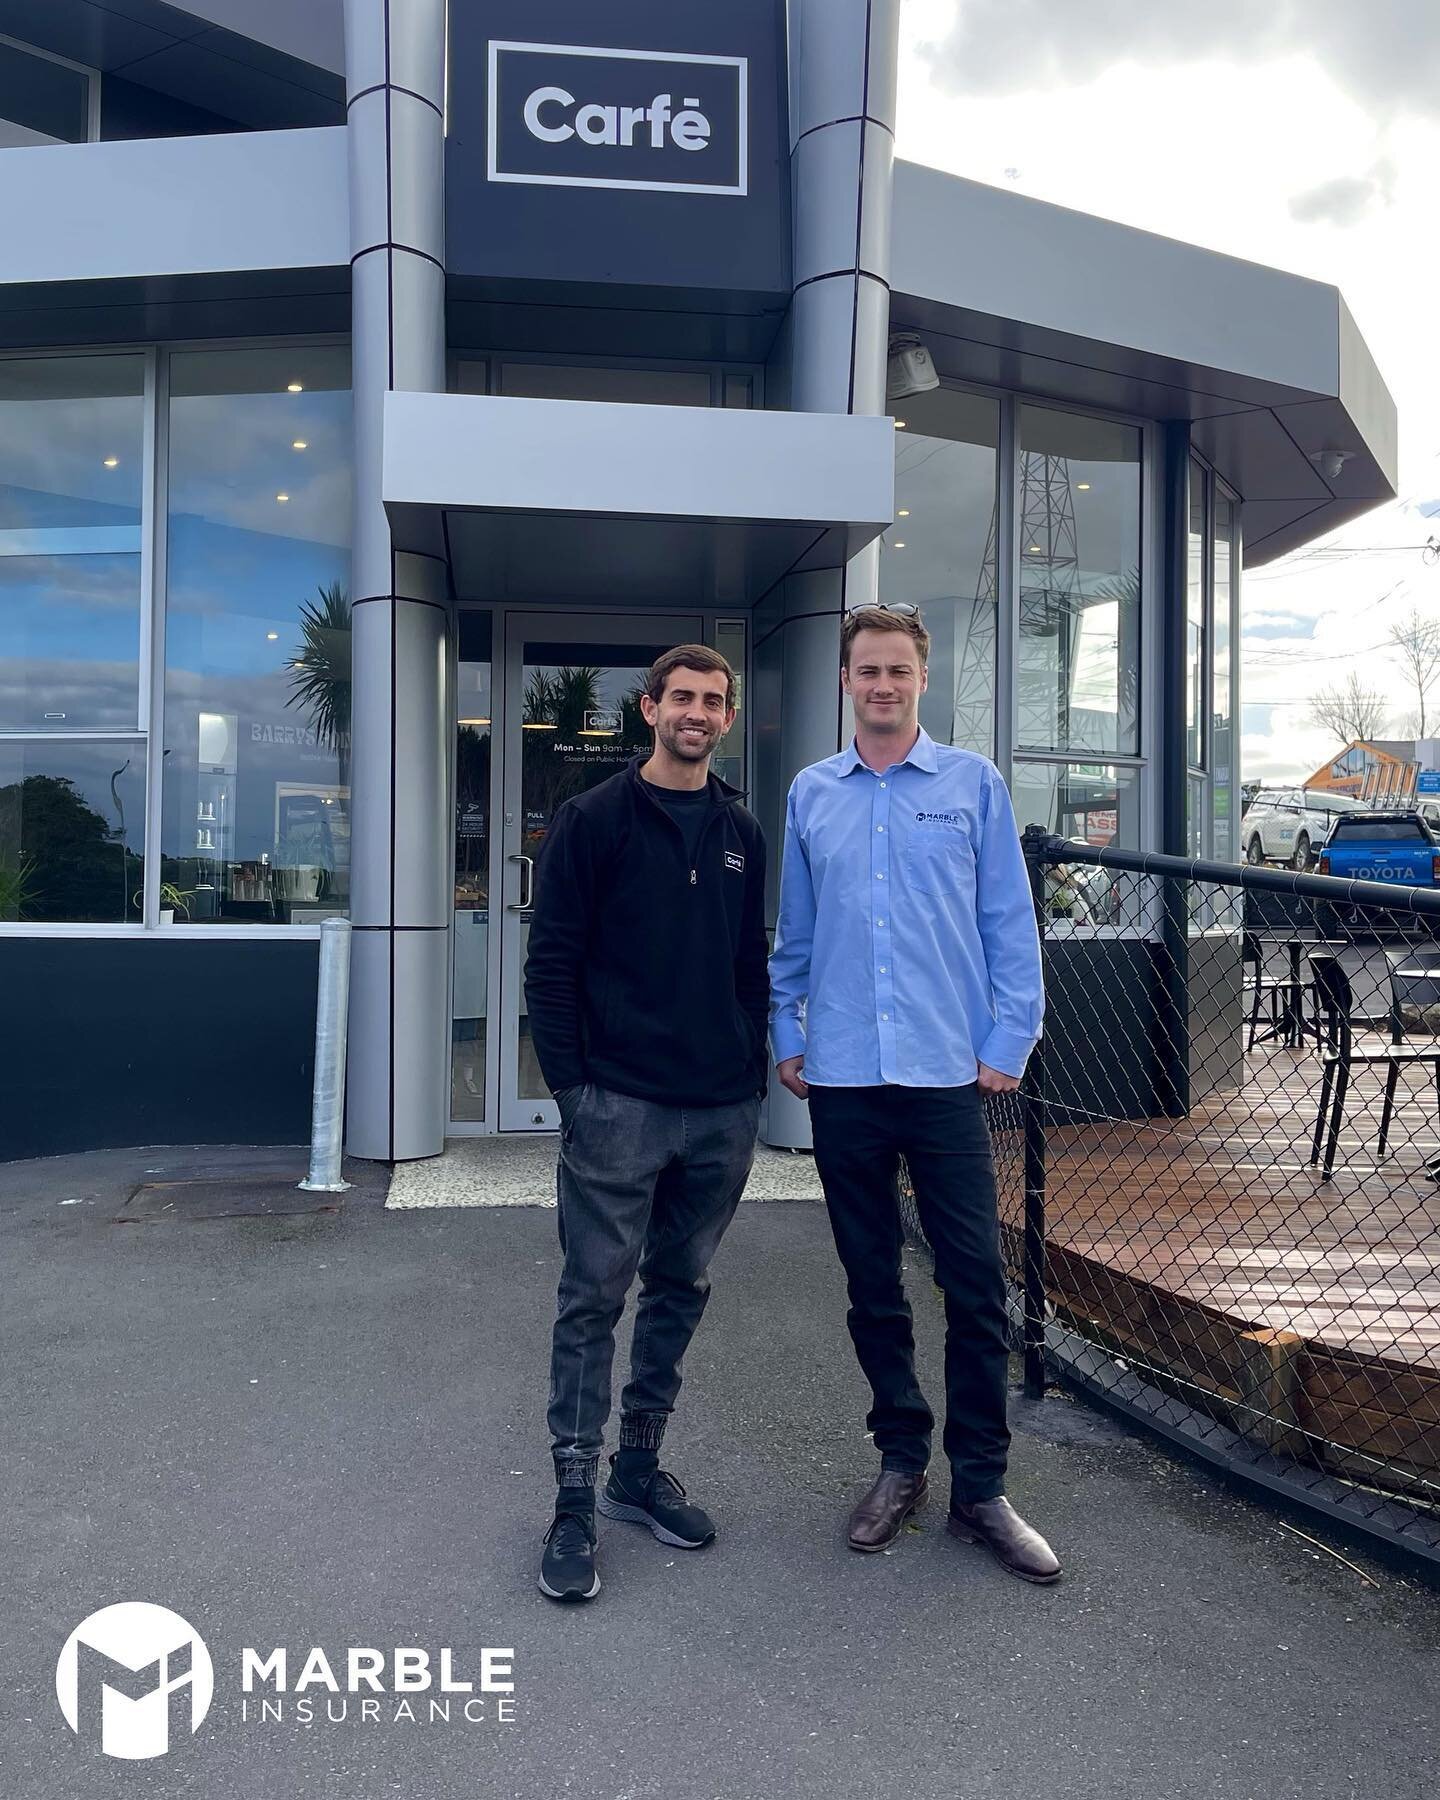 Nick checking out the brand new renovation at our client @carfe.nz &lsquo;s Barry&rsquo;s Point Road location! Pop on in to enjoy a cuppa while the team works their magic. If you want the satisfaction of cleaning your own pride and joy, @autolabs.nz 